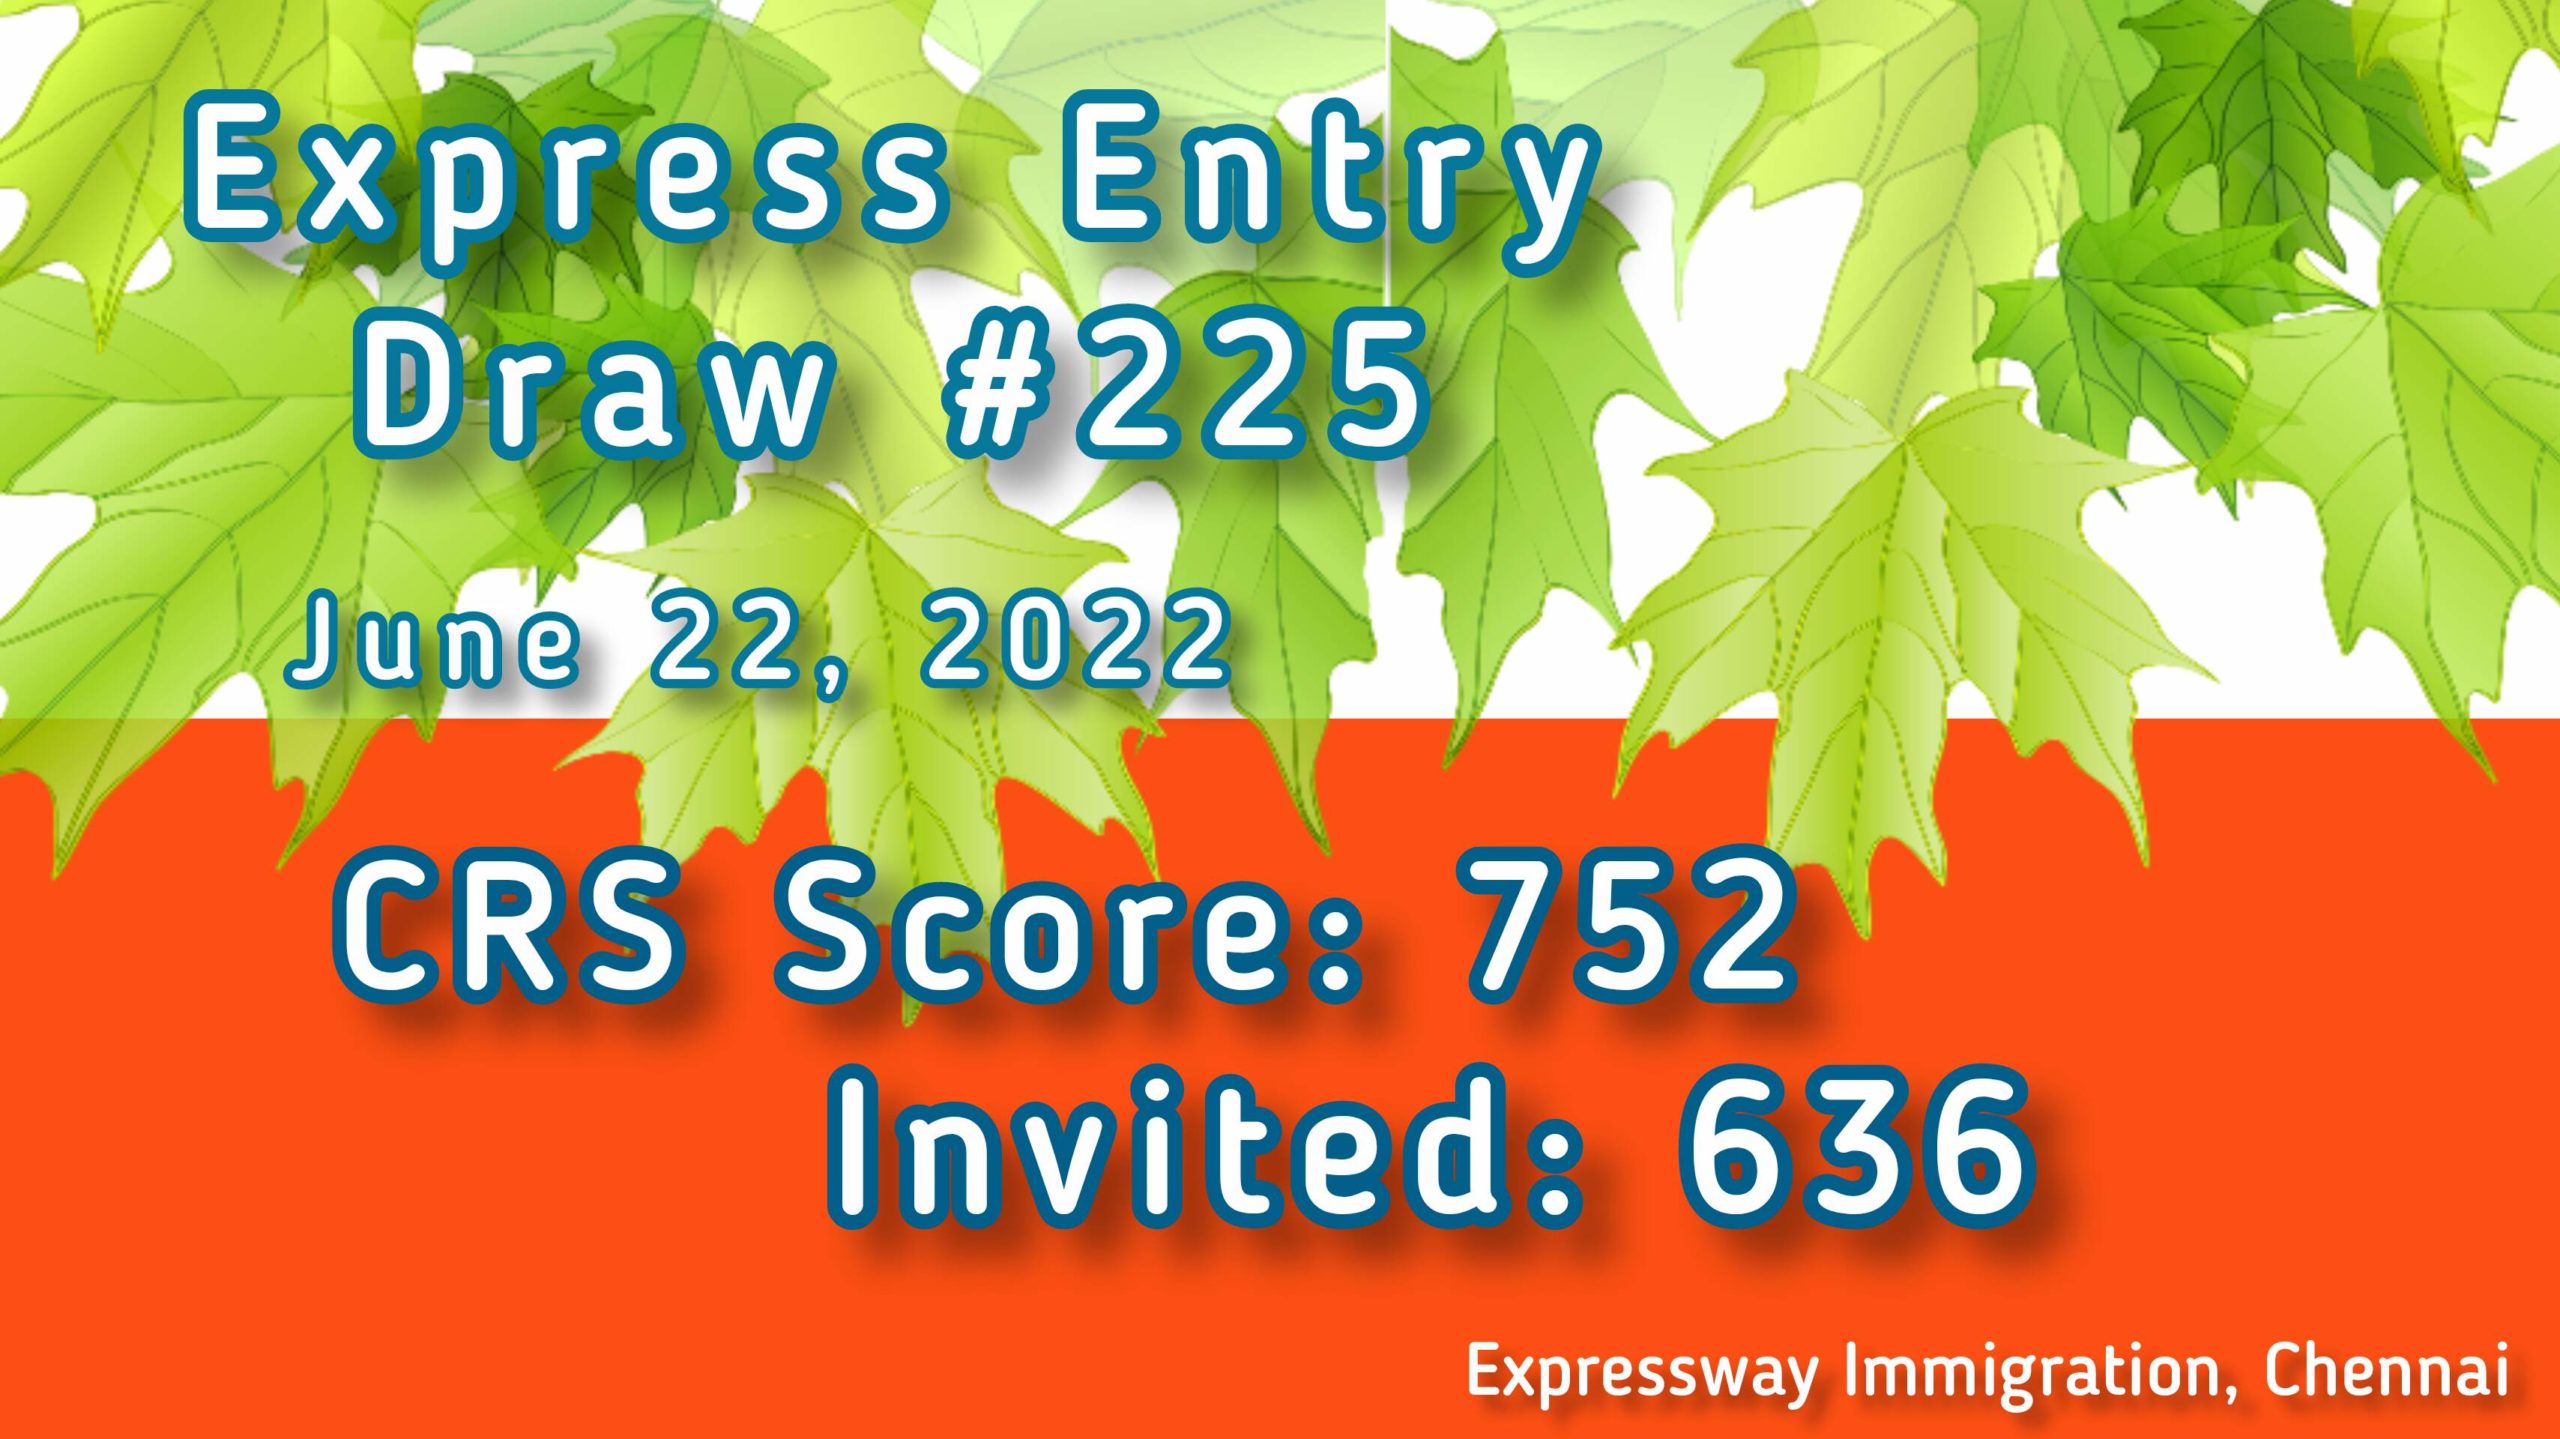 Express Entry #225